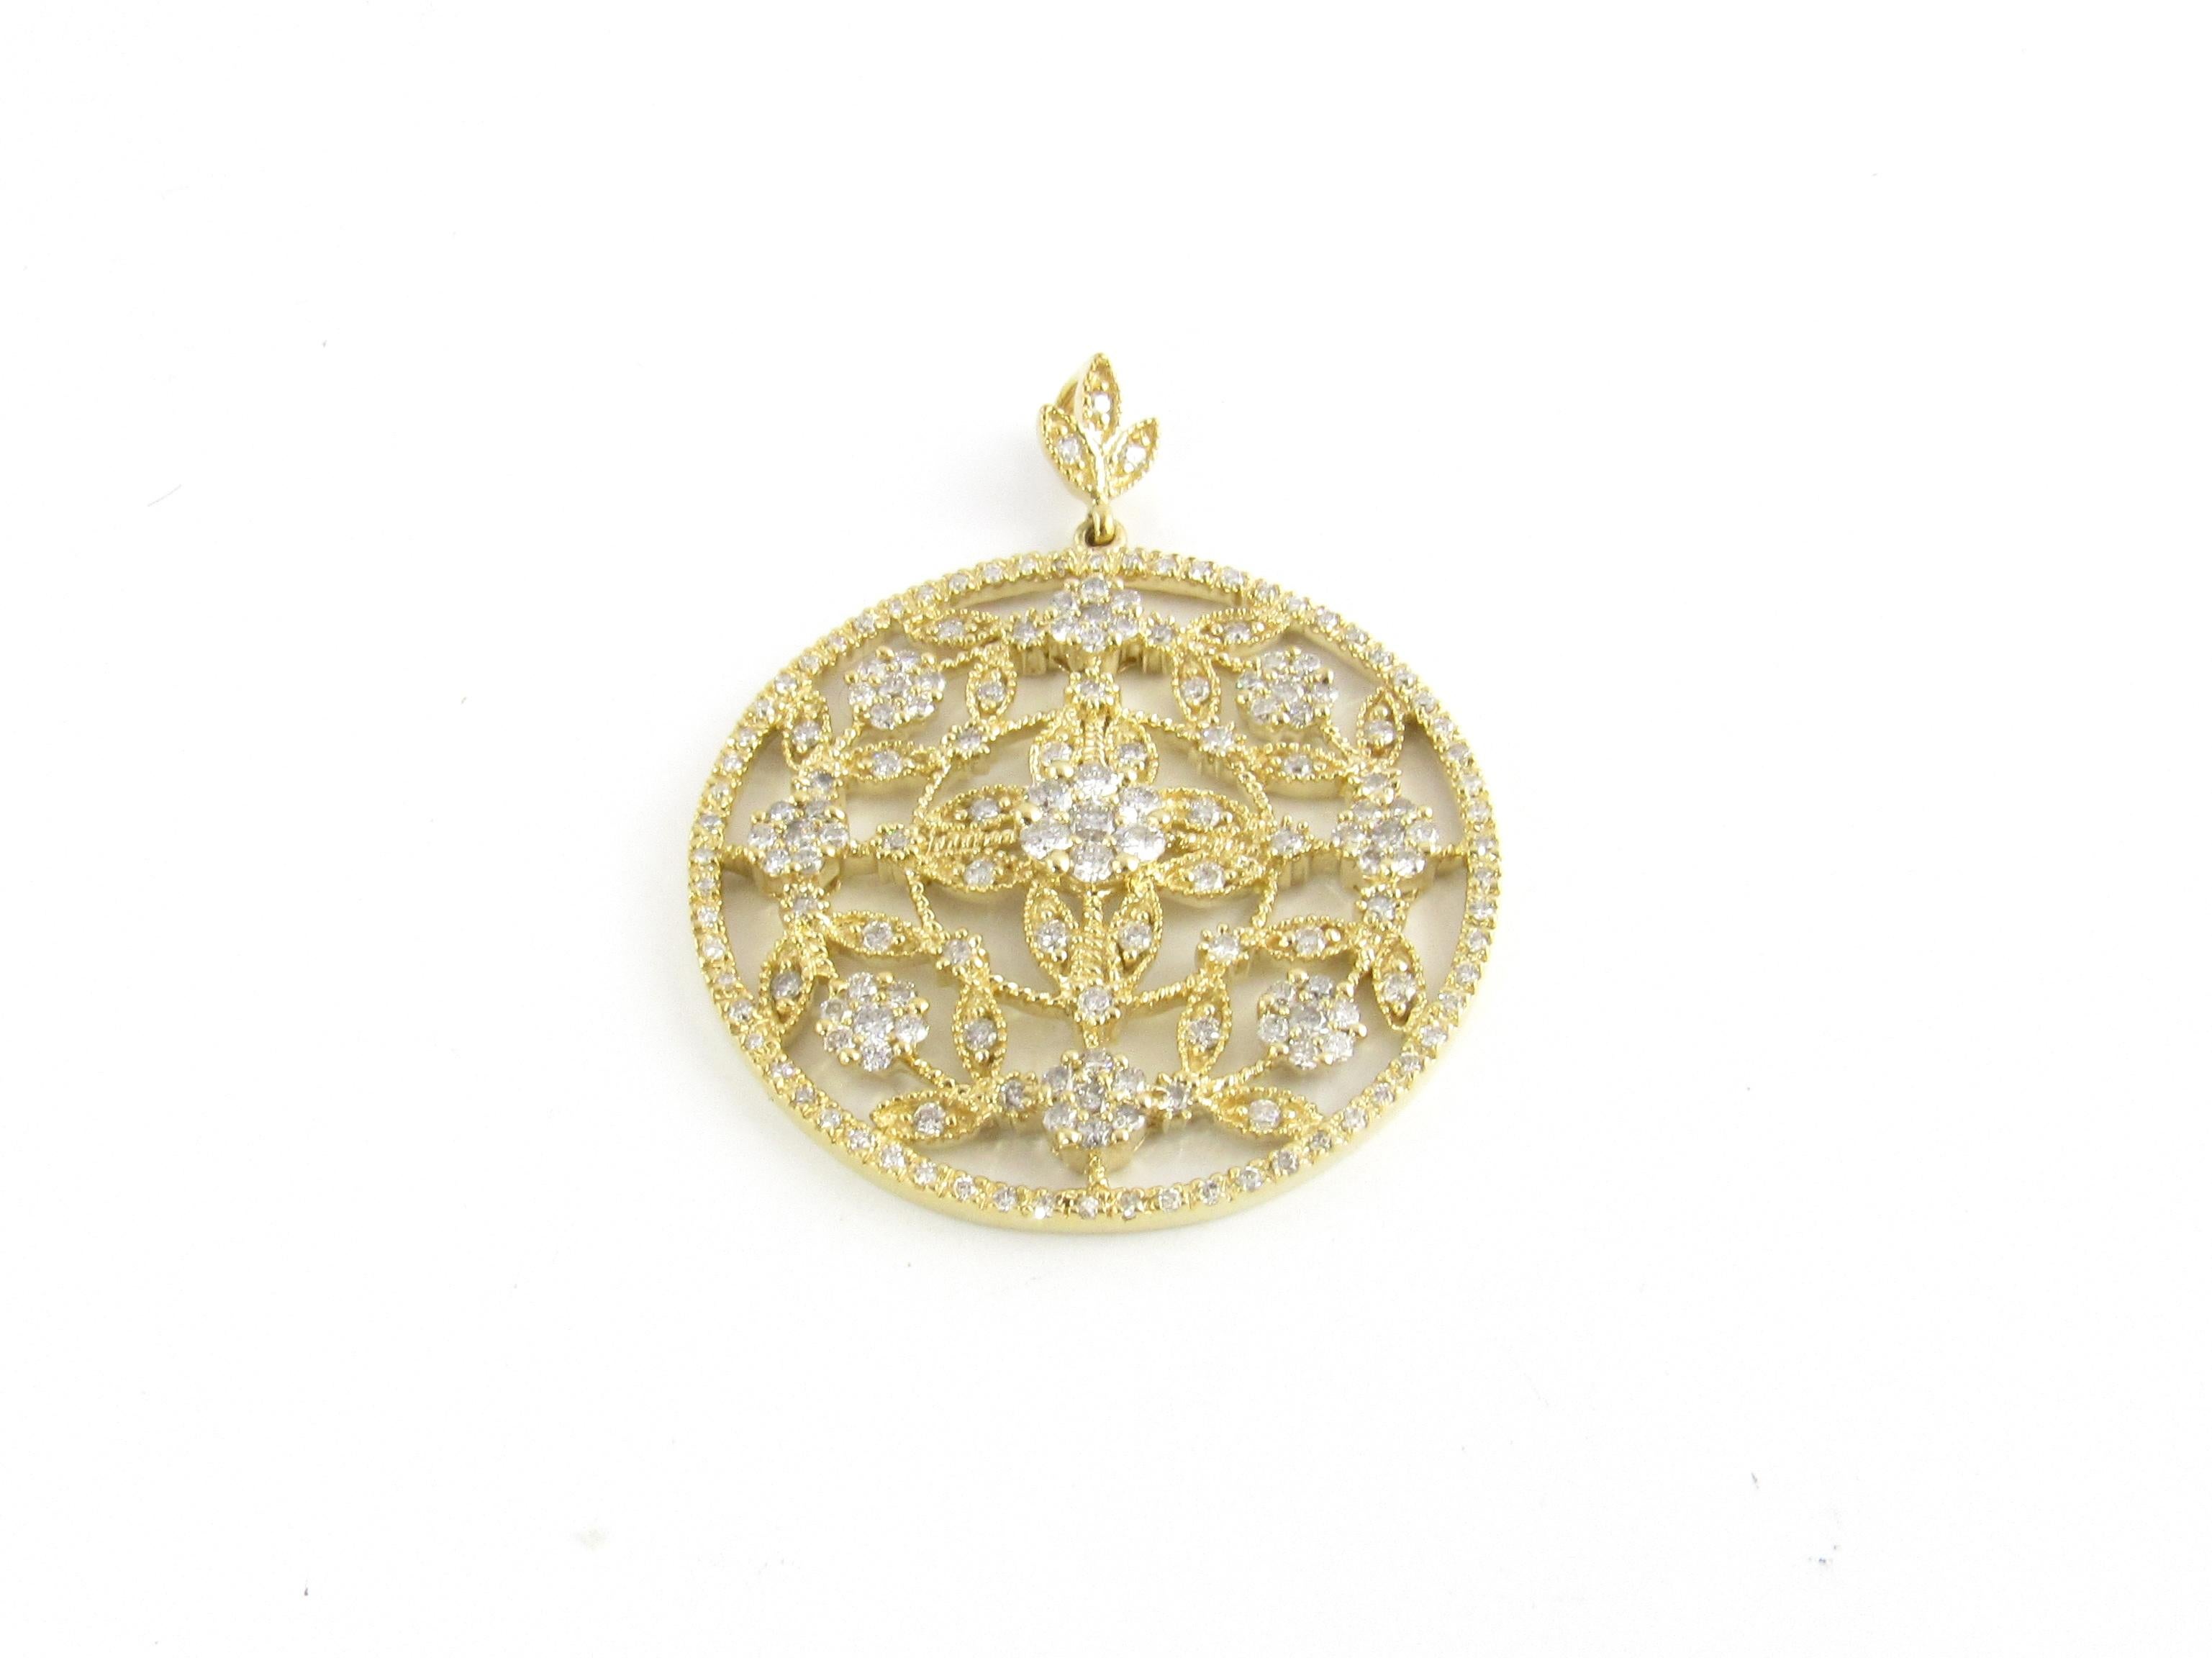 14 Karat Yellow Gold Diamond Pendant-

Make a statement with this breathtaking pendant!

This stunning piece features an exquisite flower design detailed with 155 round brilliant cut diamonds framed in beautifully detailed 14K gold.

Approximate